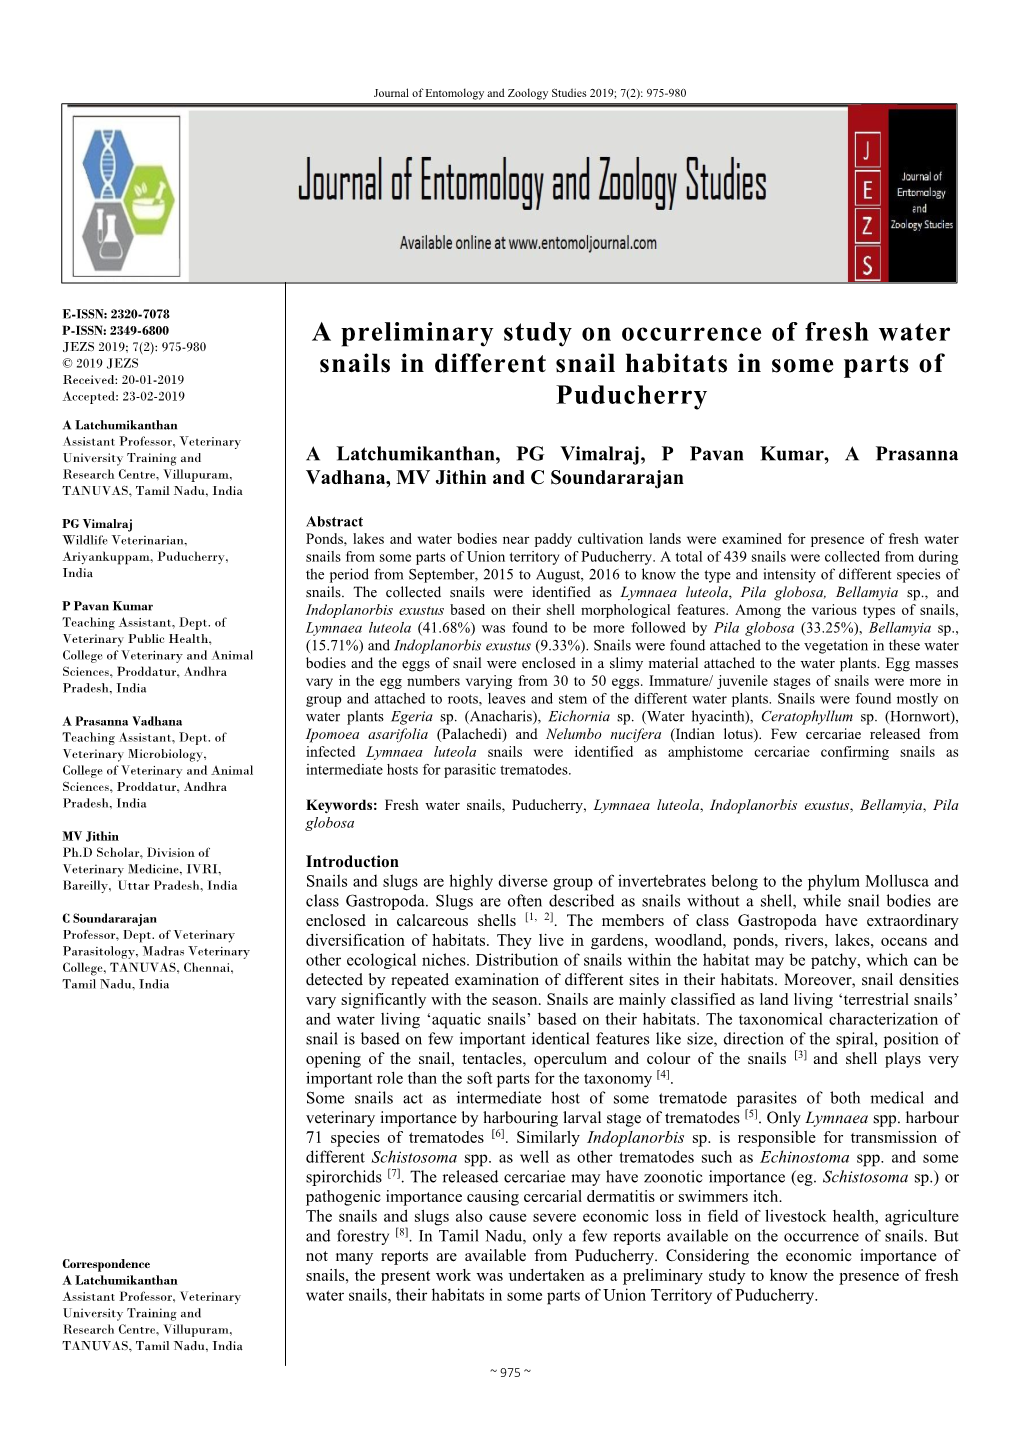 A Preliminary Study on Occurrence of Fresh Water Snails in Different Snail